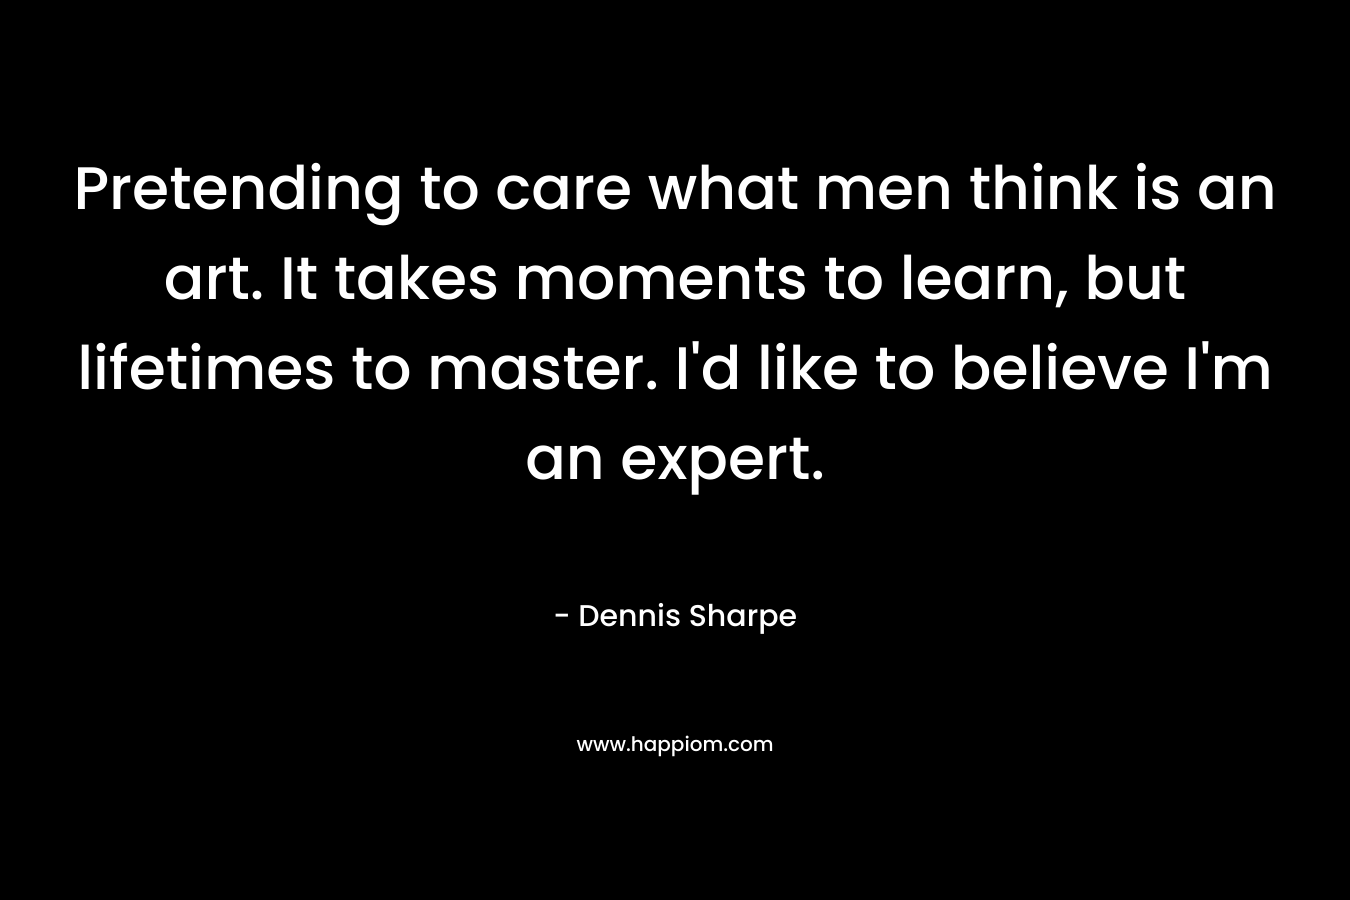 Pretending to care what men think is an art. It takes moments to learn, but lifetimes to master. I’d like to believe I’m an expert. – Dennis Sharpe